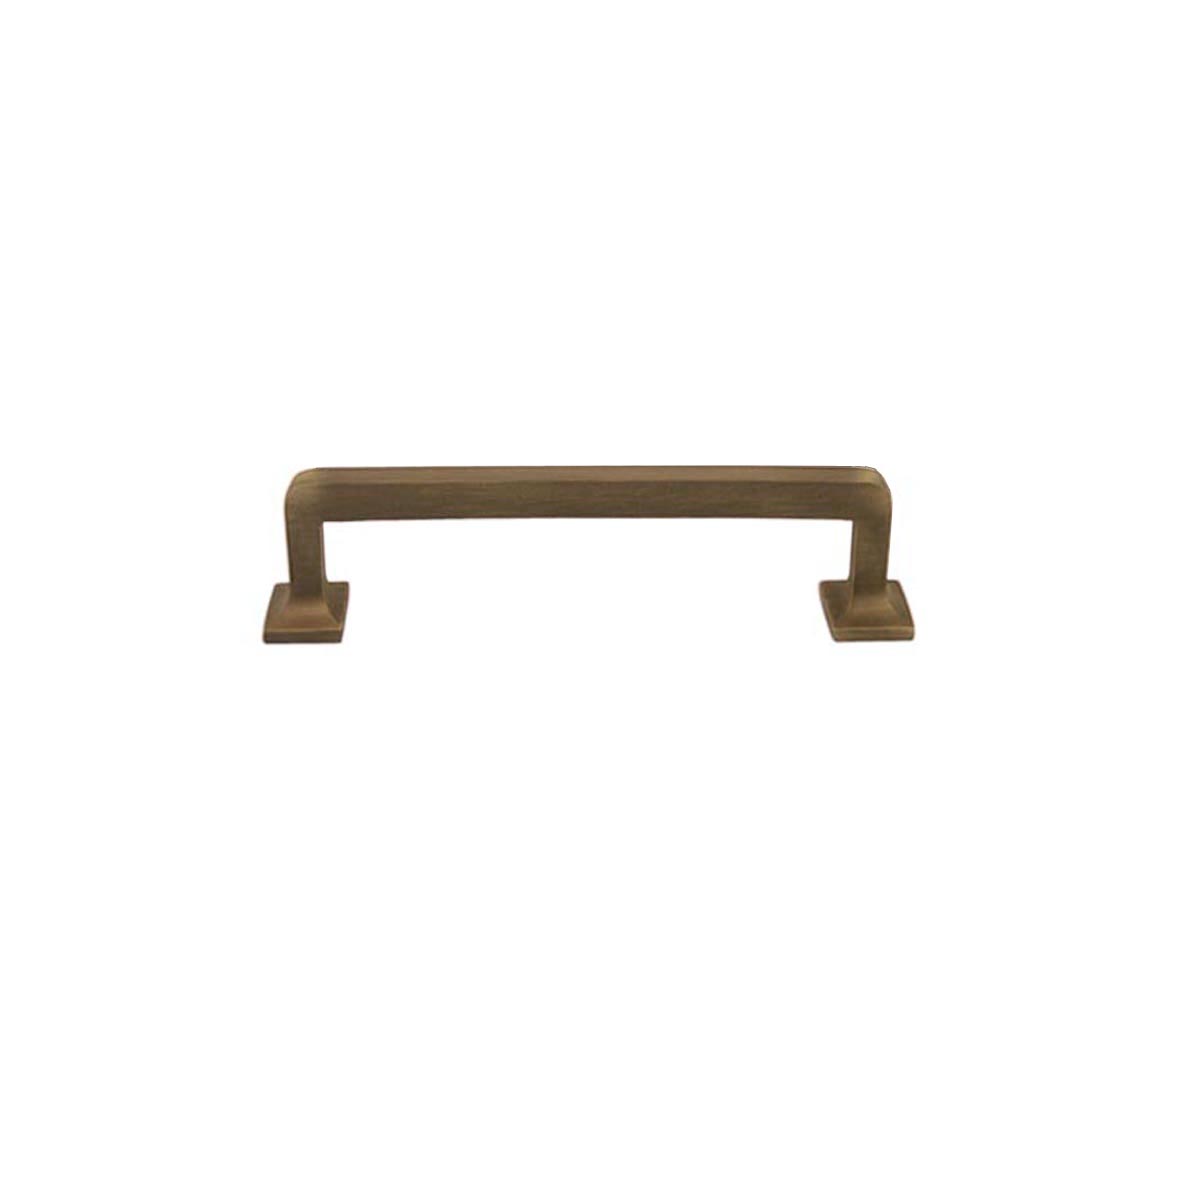 Substantial 4" Brass Cabinet Handle, Paxton Hardware